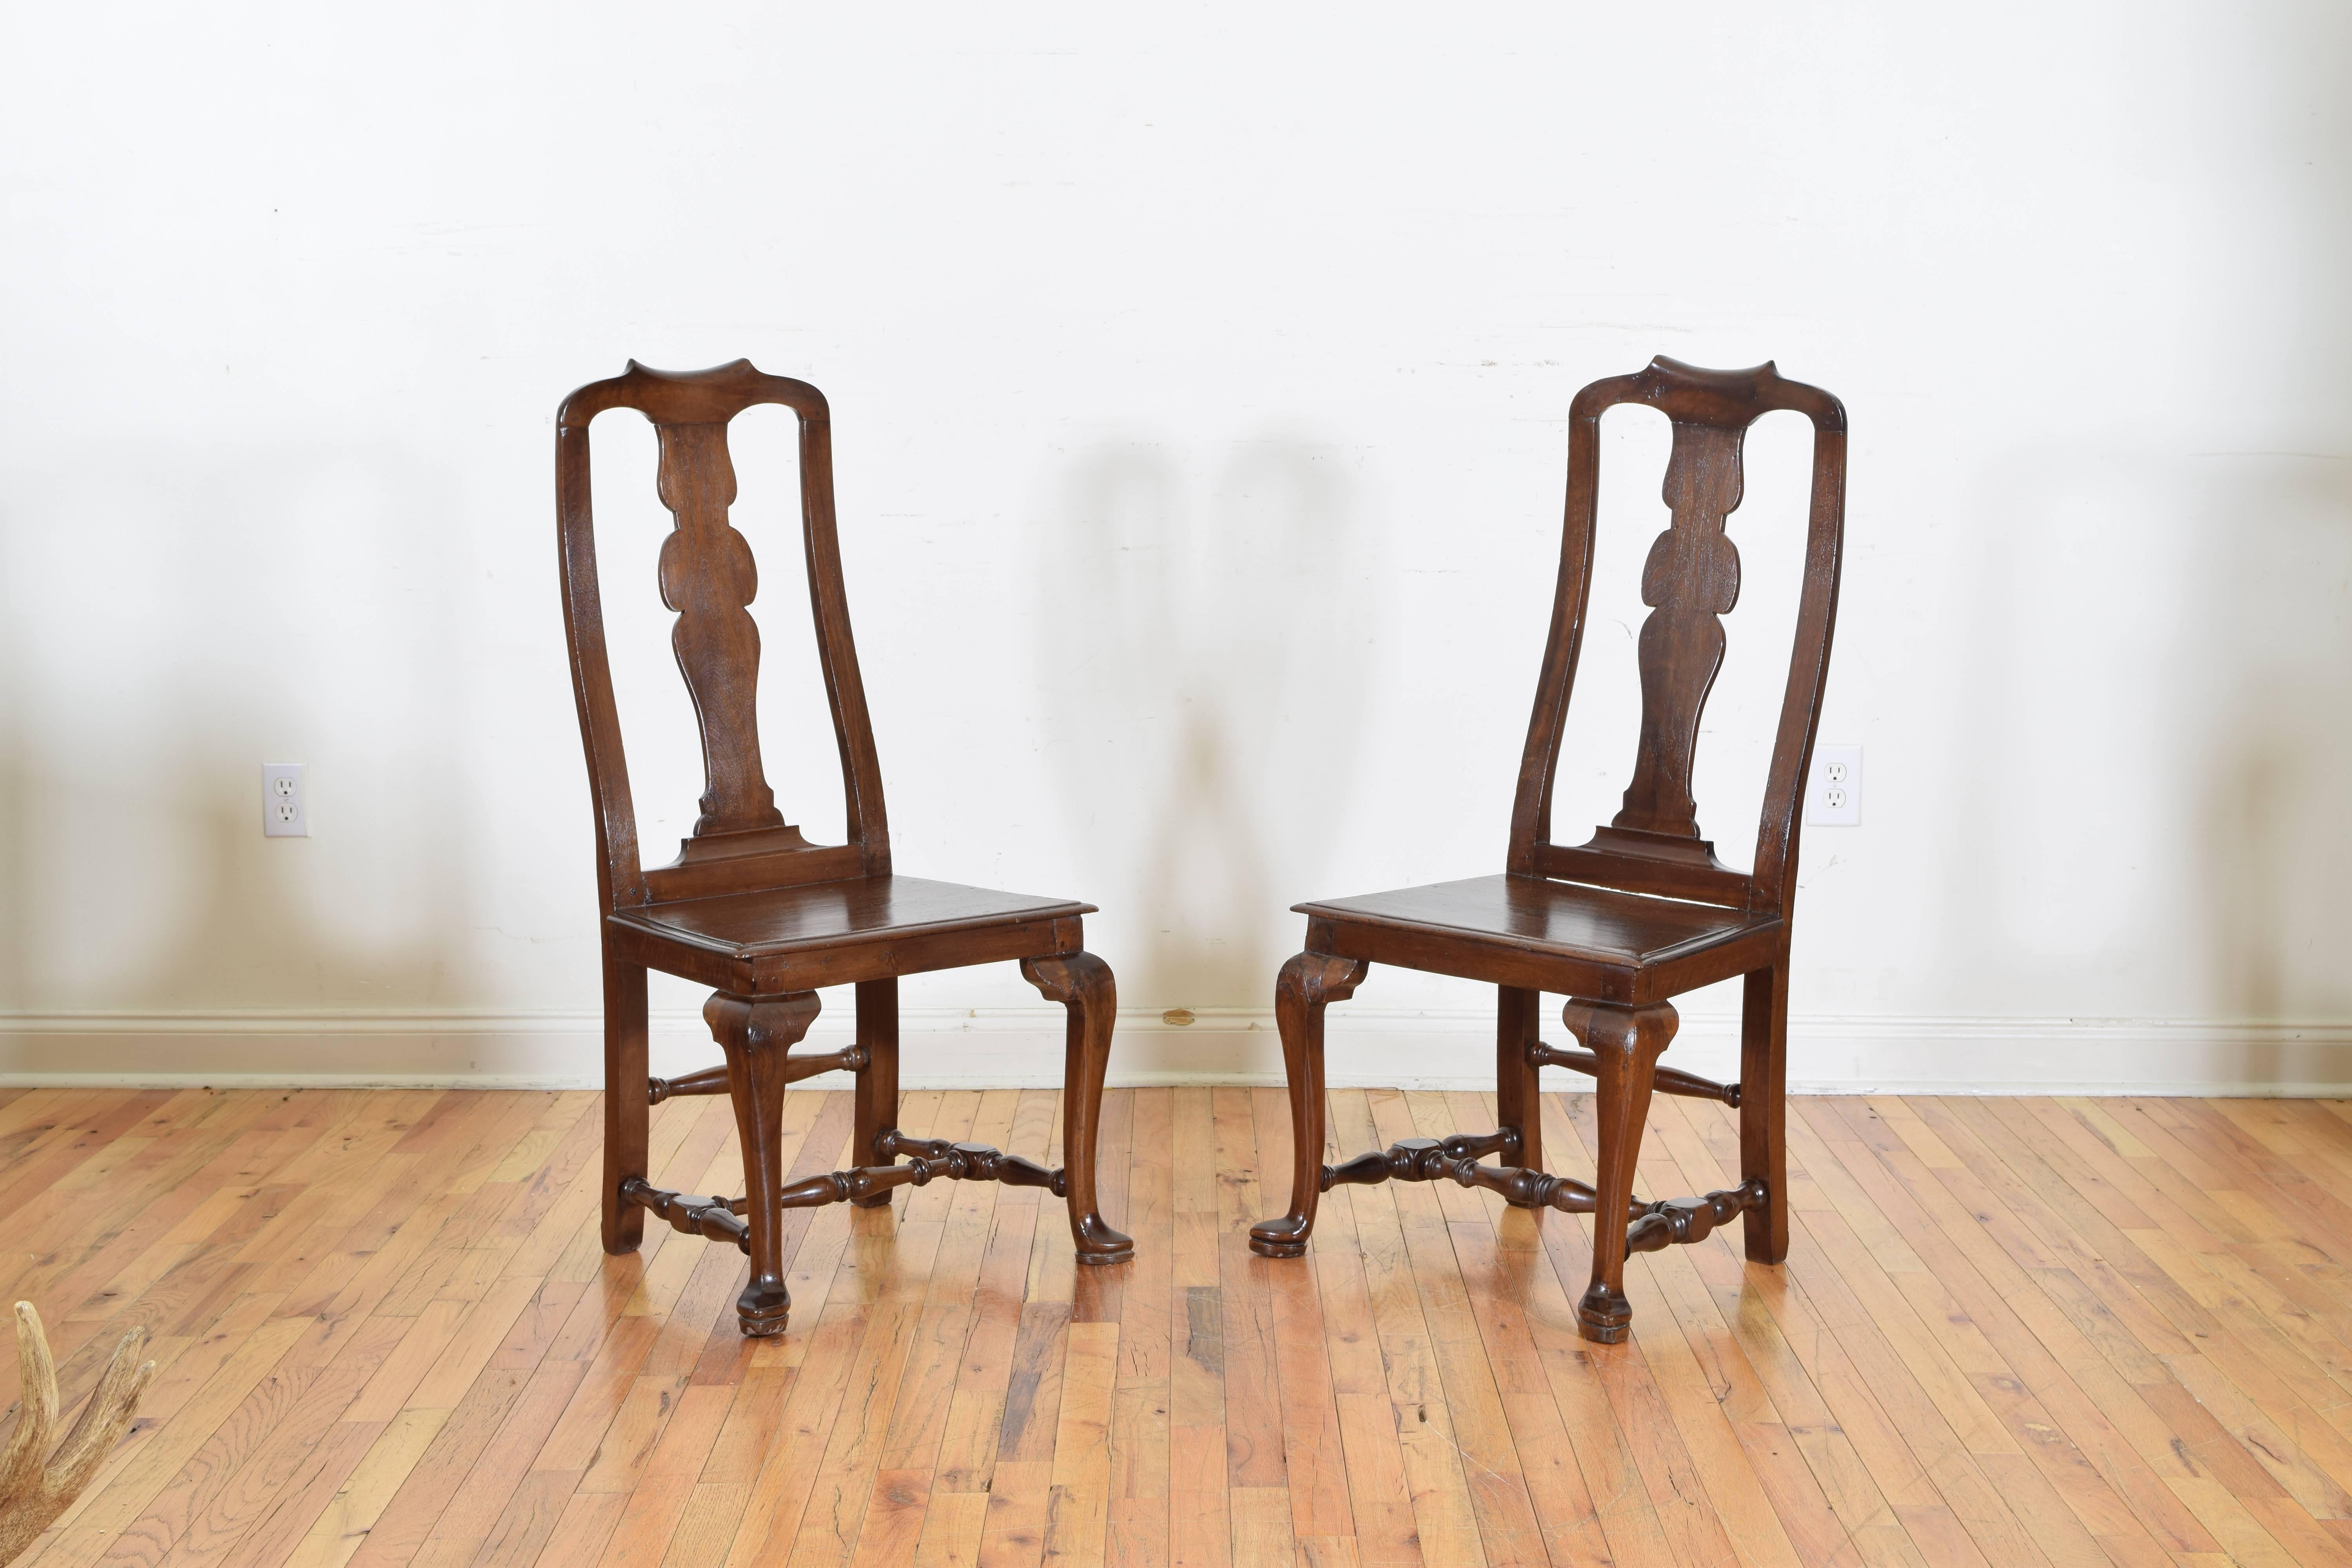 A pair of shaped walnut side chairs having a bow-shaped pierced backrests, the wooden seats supported by Queen Annes style cabriole legs with slipper feet, rear legs splayed, all joined by turned stretchers.